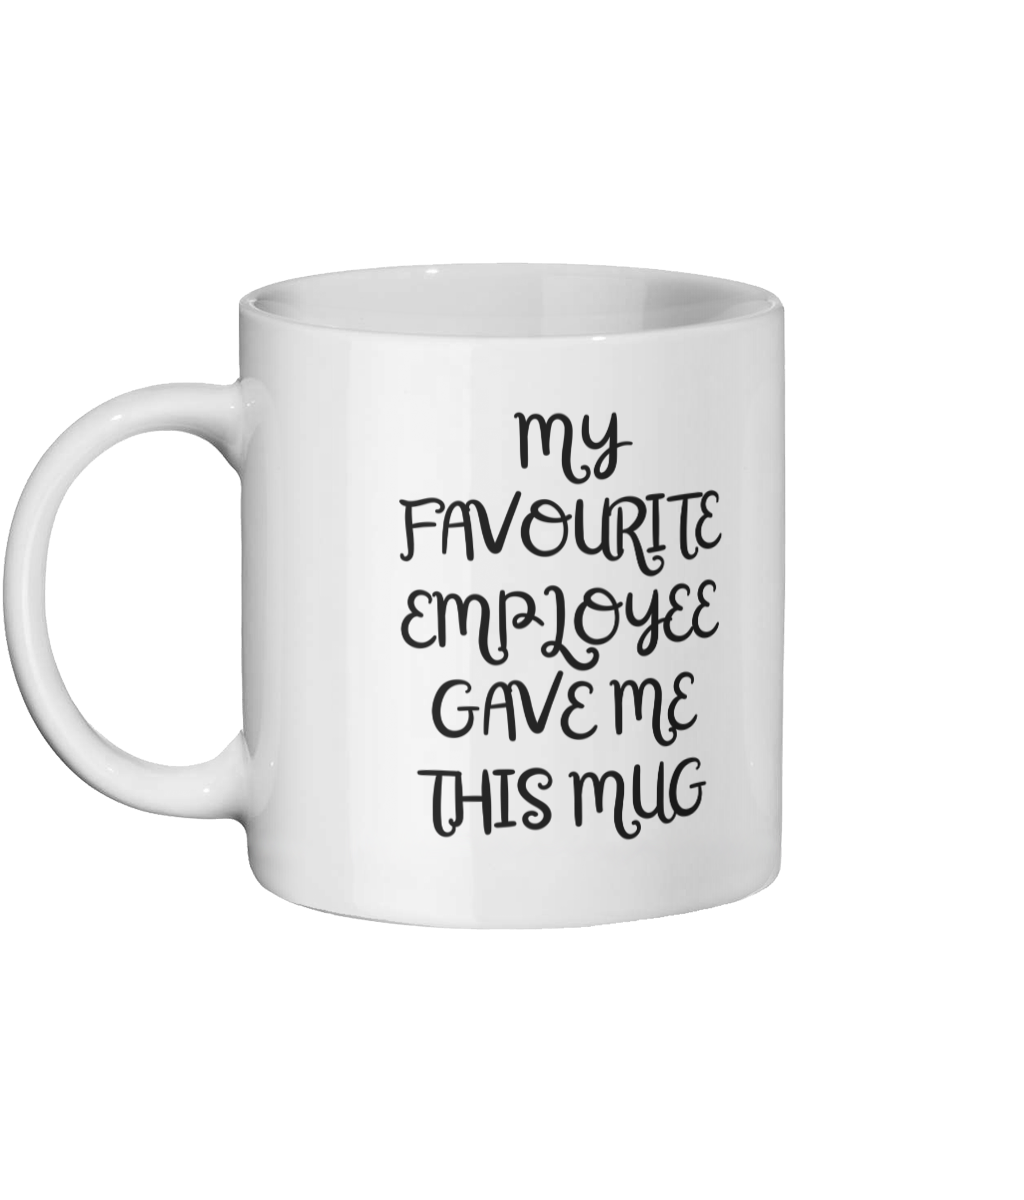 Favourite Employee Mug - Gift/Present idea for him/her